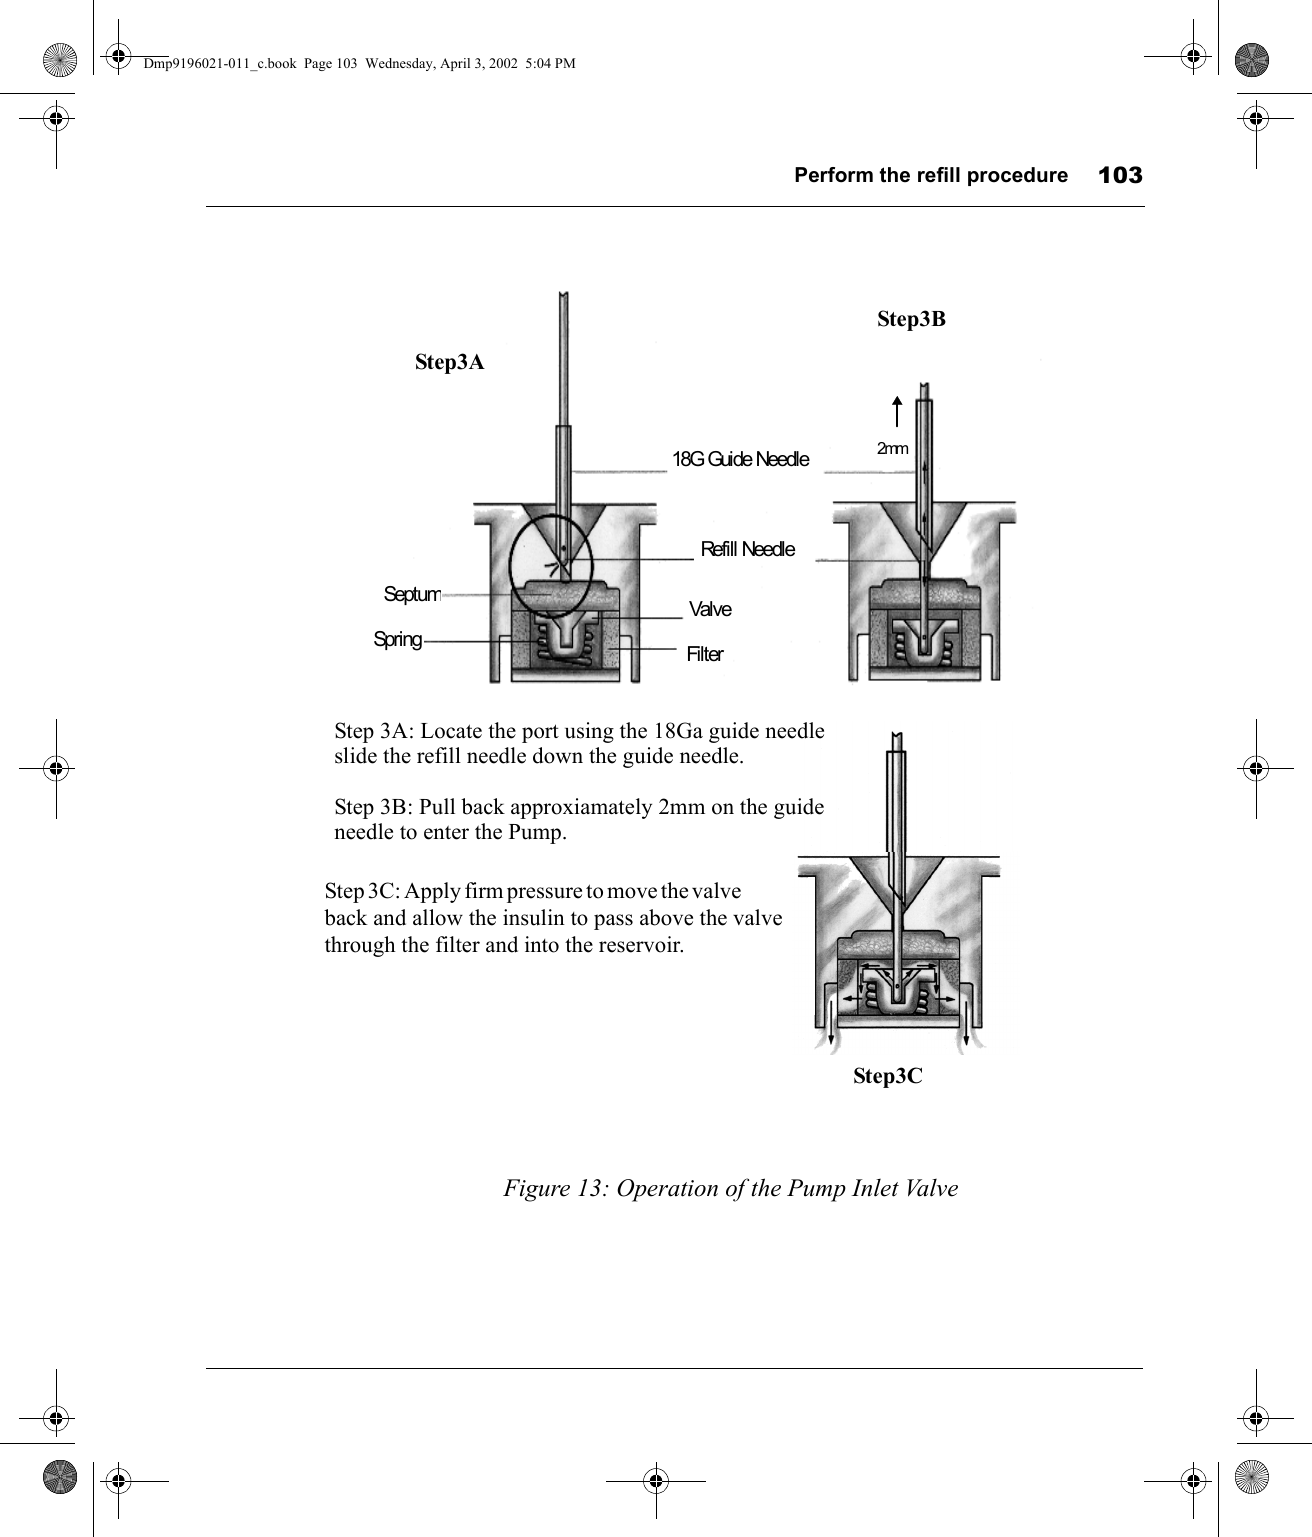 Perform the refill procedure 103Figure 13: Operation of the Pump Inlet Valve18G Guide NeedleRefill NeedleValveFilterSeptumSpring2mmSt e p  3 C:  A pp ly  fi r m  pr e s su re  t o m o ve  t h e  va lv e                back and allow the insulin to pass above the valve through the filter and into the reservoir.Step 3A: Locate the port using the 18Ga guide needleslide the refill needle down the guide needle.Step 3B: Pull back approxiamately 2mm on the guide needle to enter the Pump.Step3A            Step3B       Step3CDmp9196021-011_c.book  Page 103  Wednesday, April 3, 2002  5:04 PM